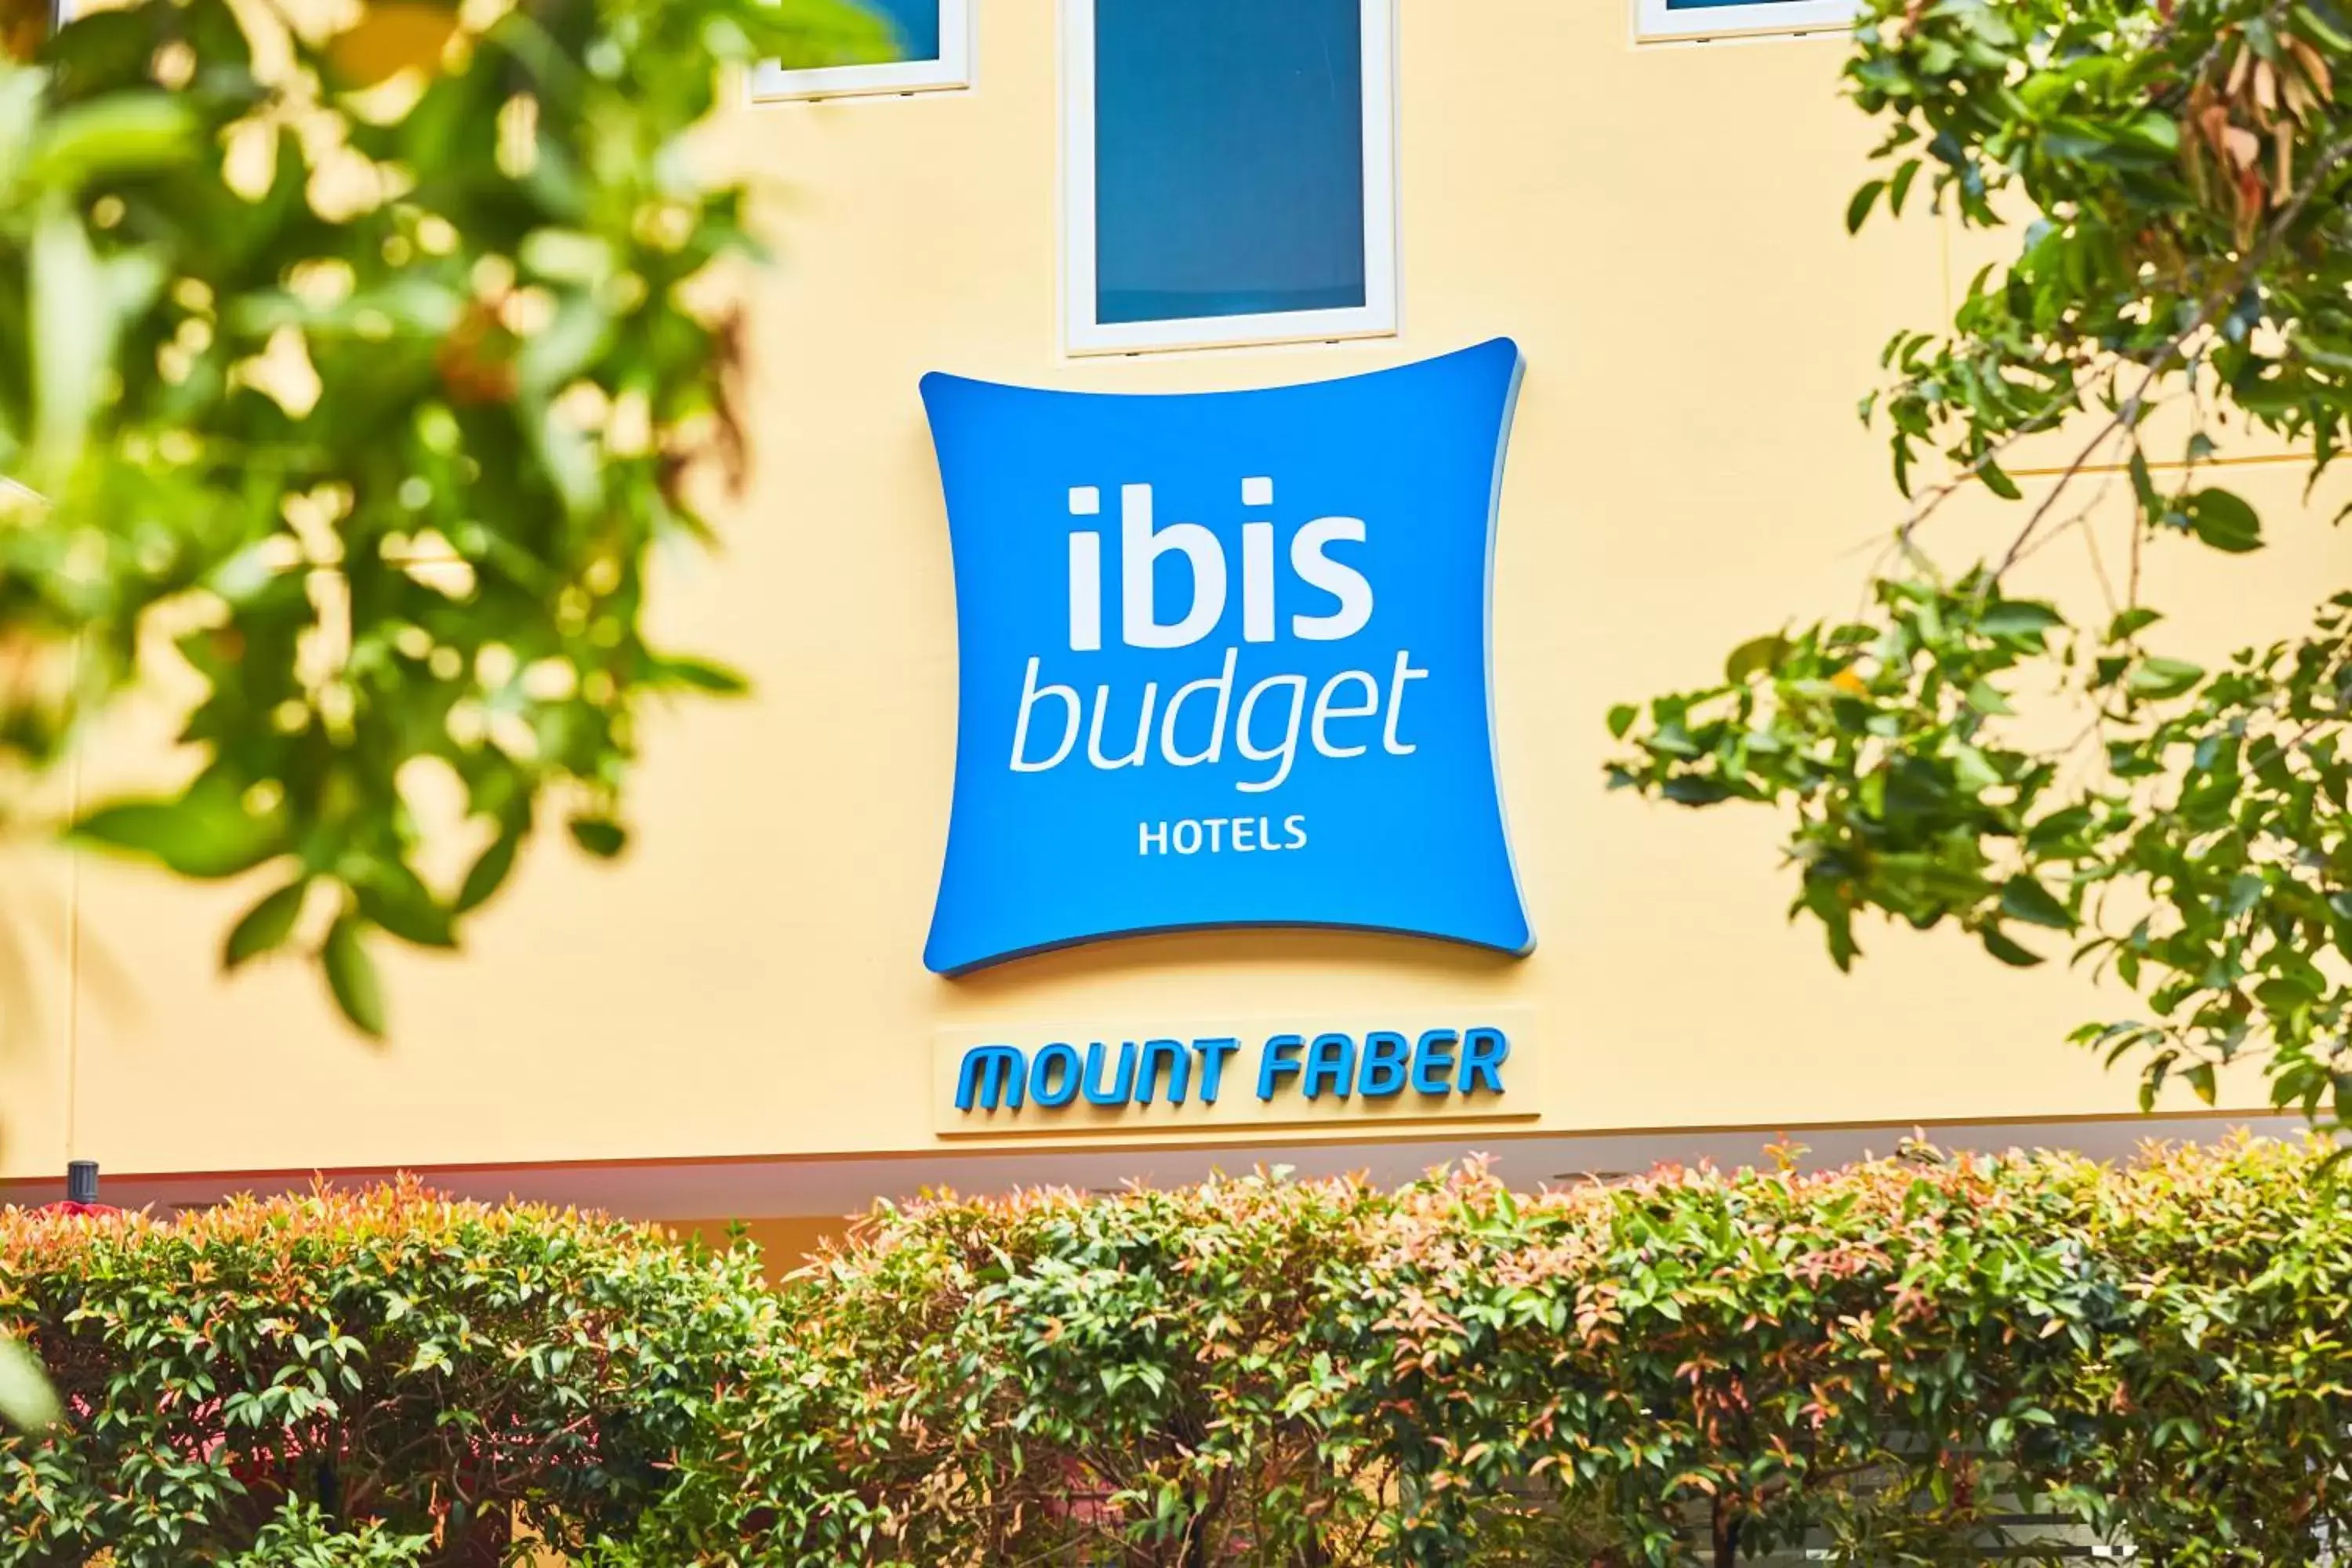 Property logo or sign in ibis budget Singapore Mount Faber